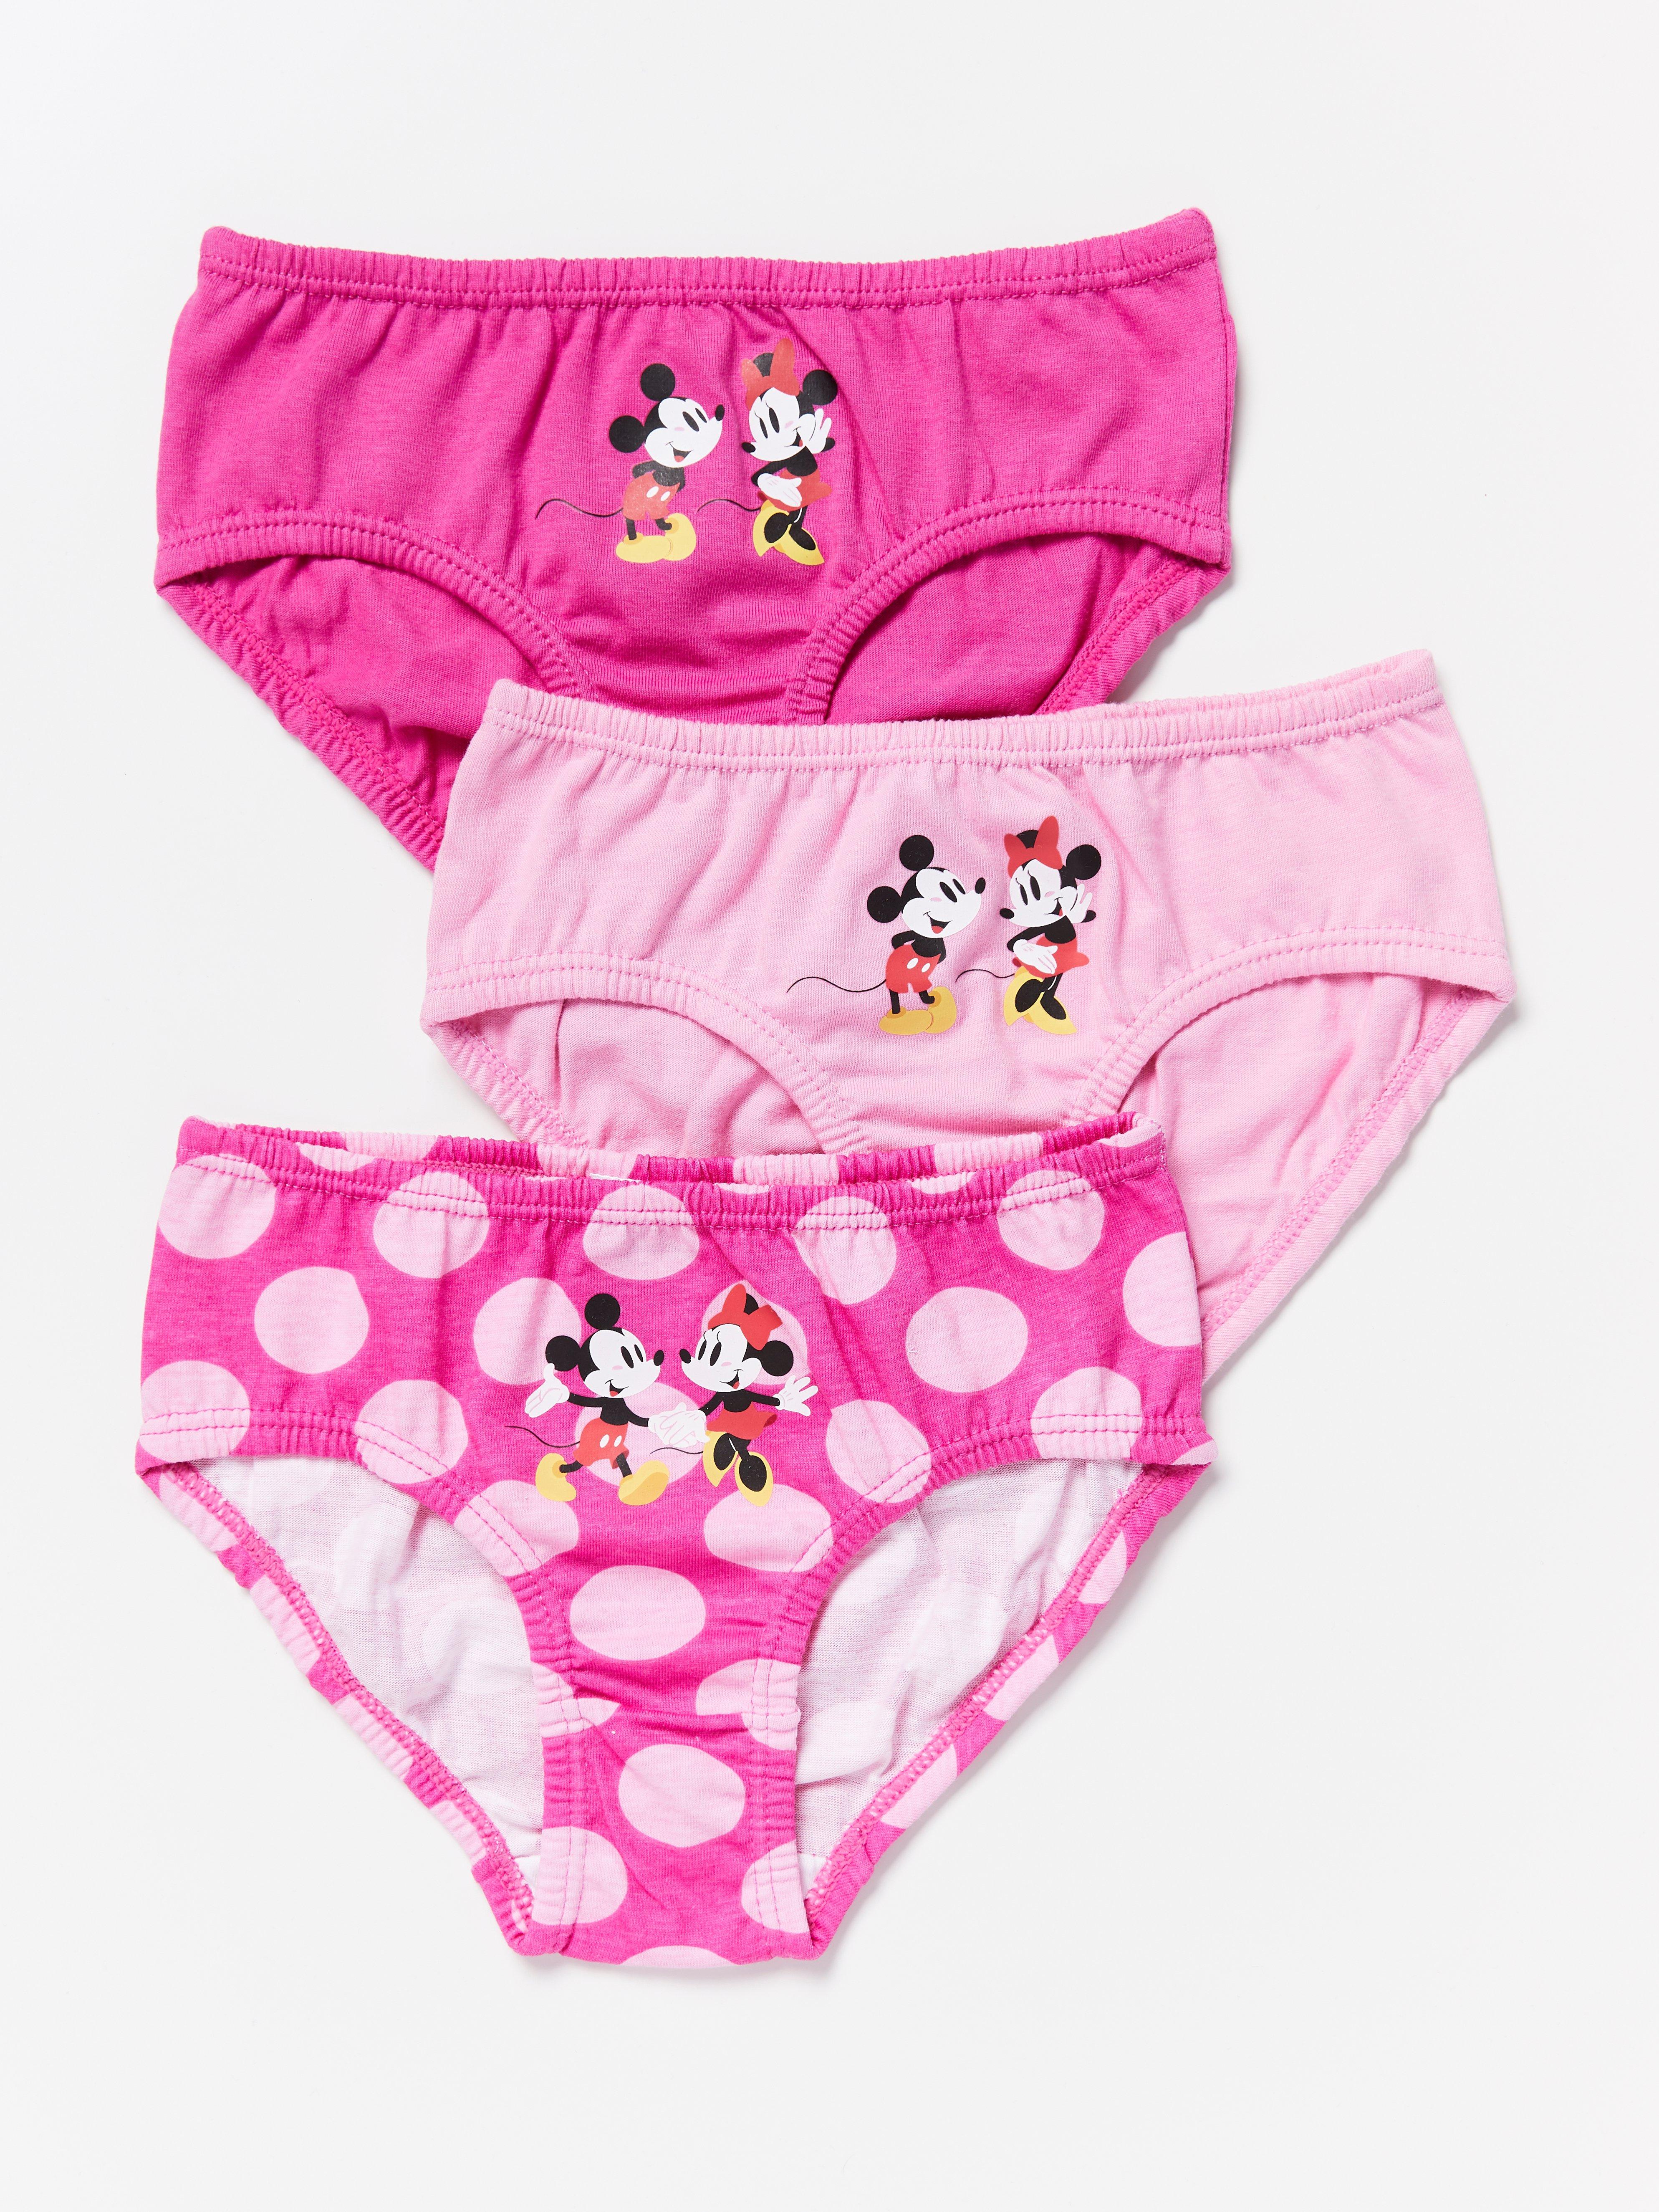 pack of 3 Disney Minnie Mouse Briefs,Underwear,Pants,100% Cotton ,Age 2-8  Years